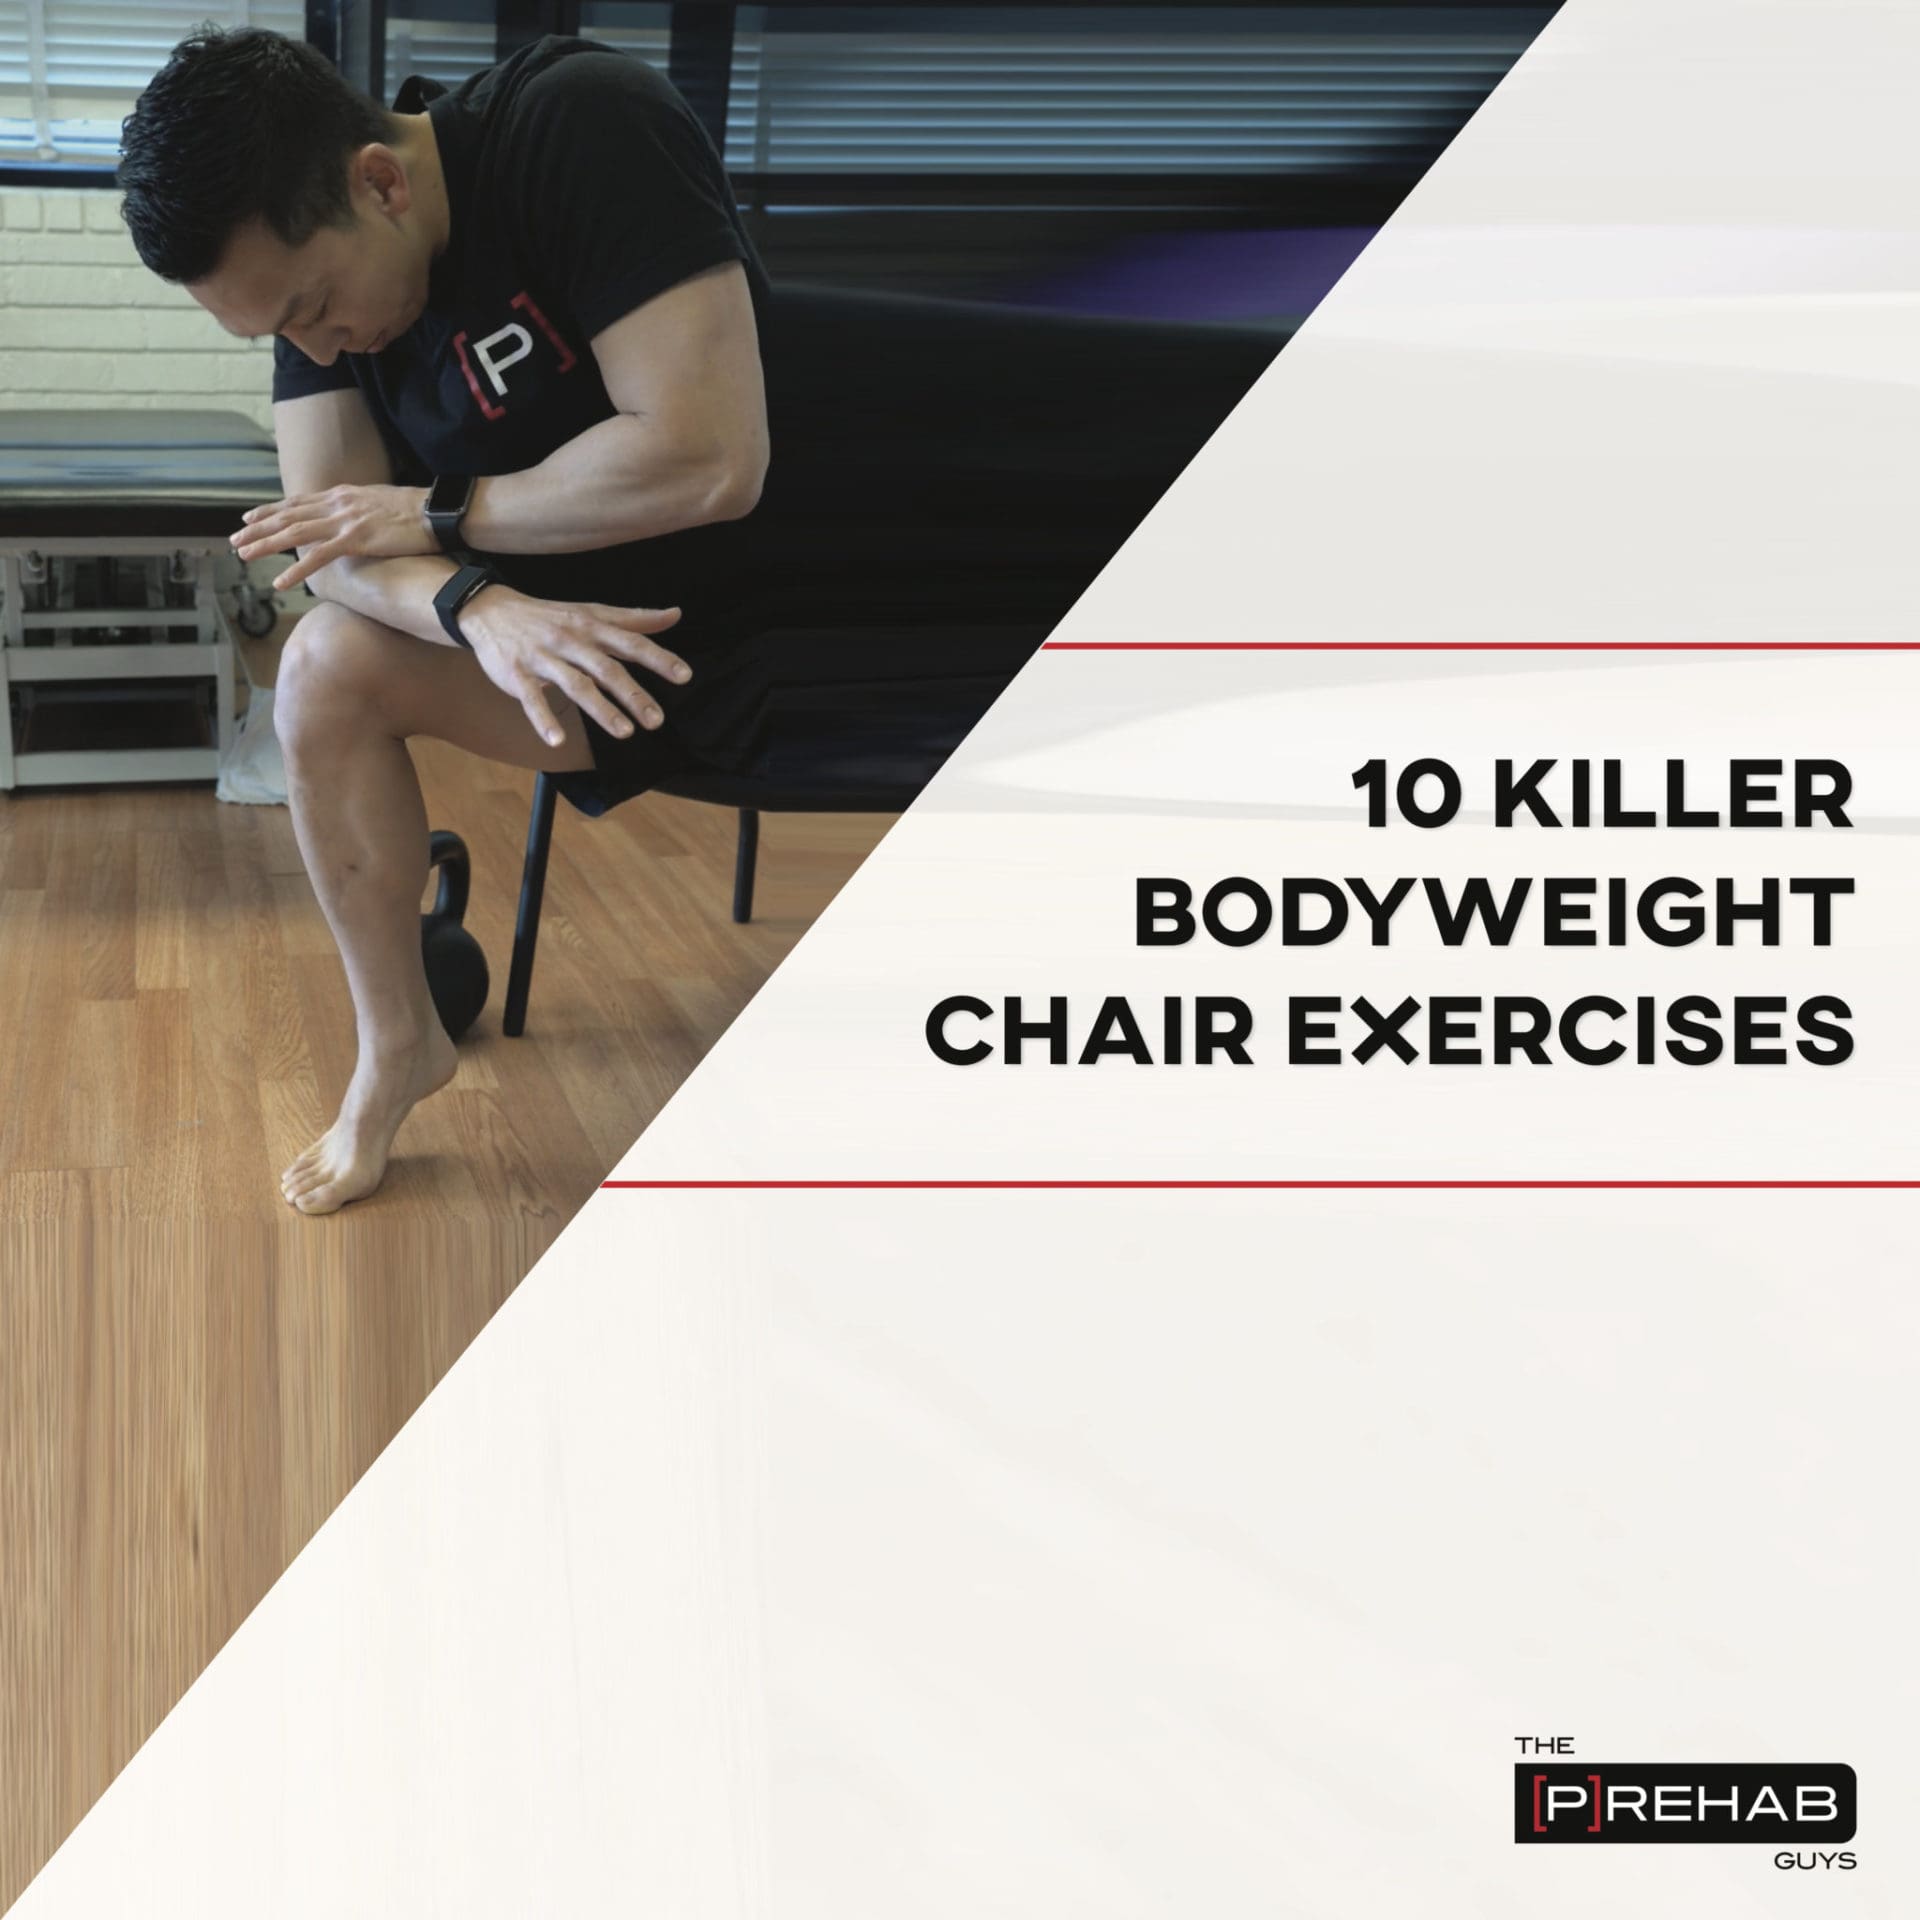 Bodyweight Chair Exercises To Challenge Your Home Workouts 